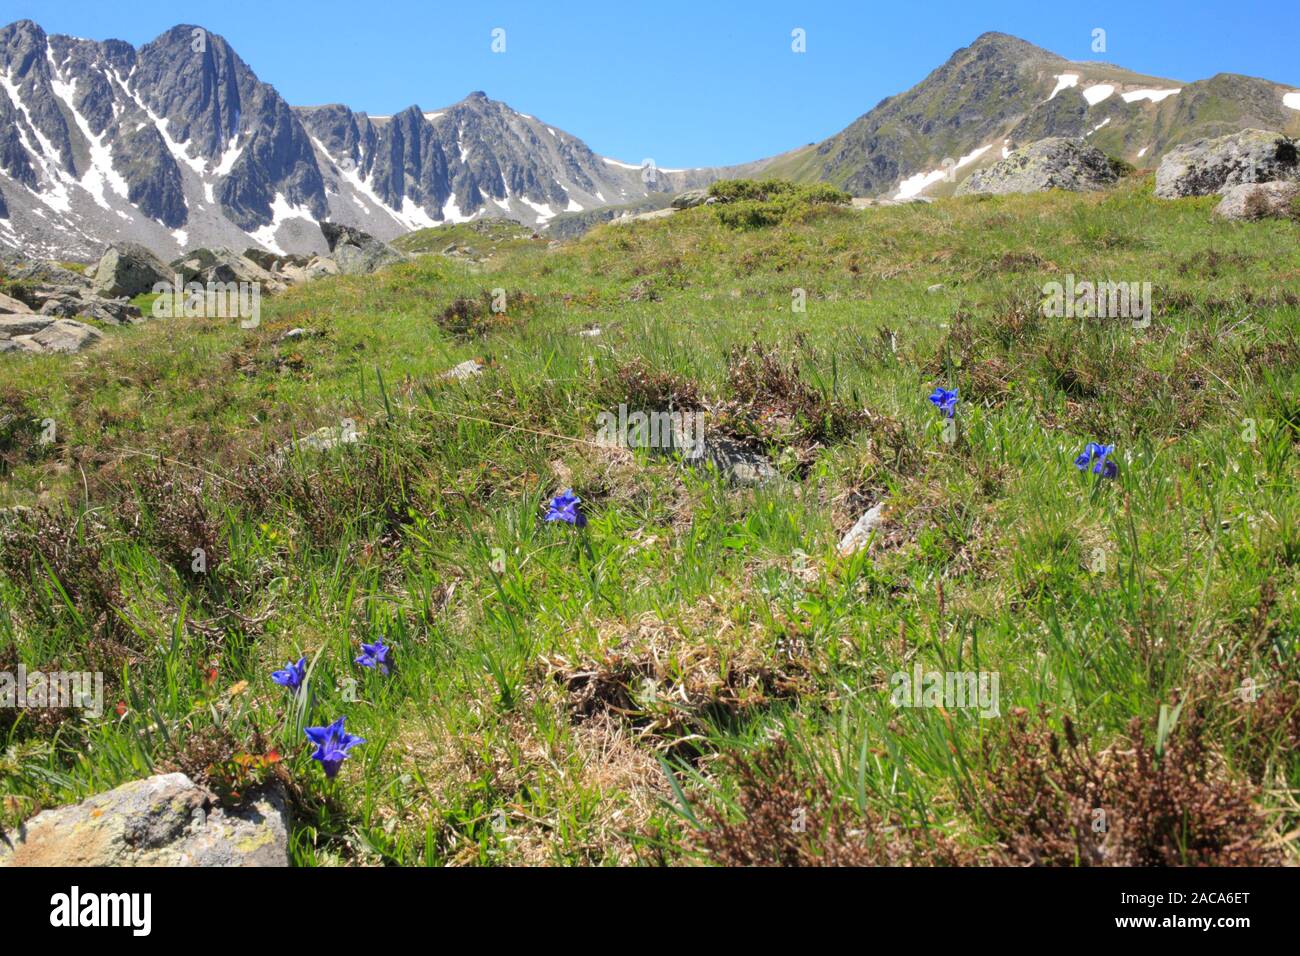 Southern Gentians (Gentiana alpina) flowering at 2400m near the Col de Puymorens, Pyrénées-Orientales, France. Stock Photo